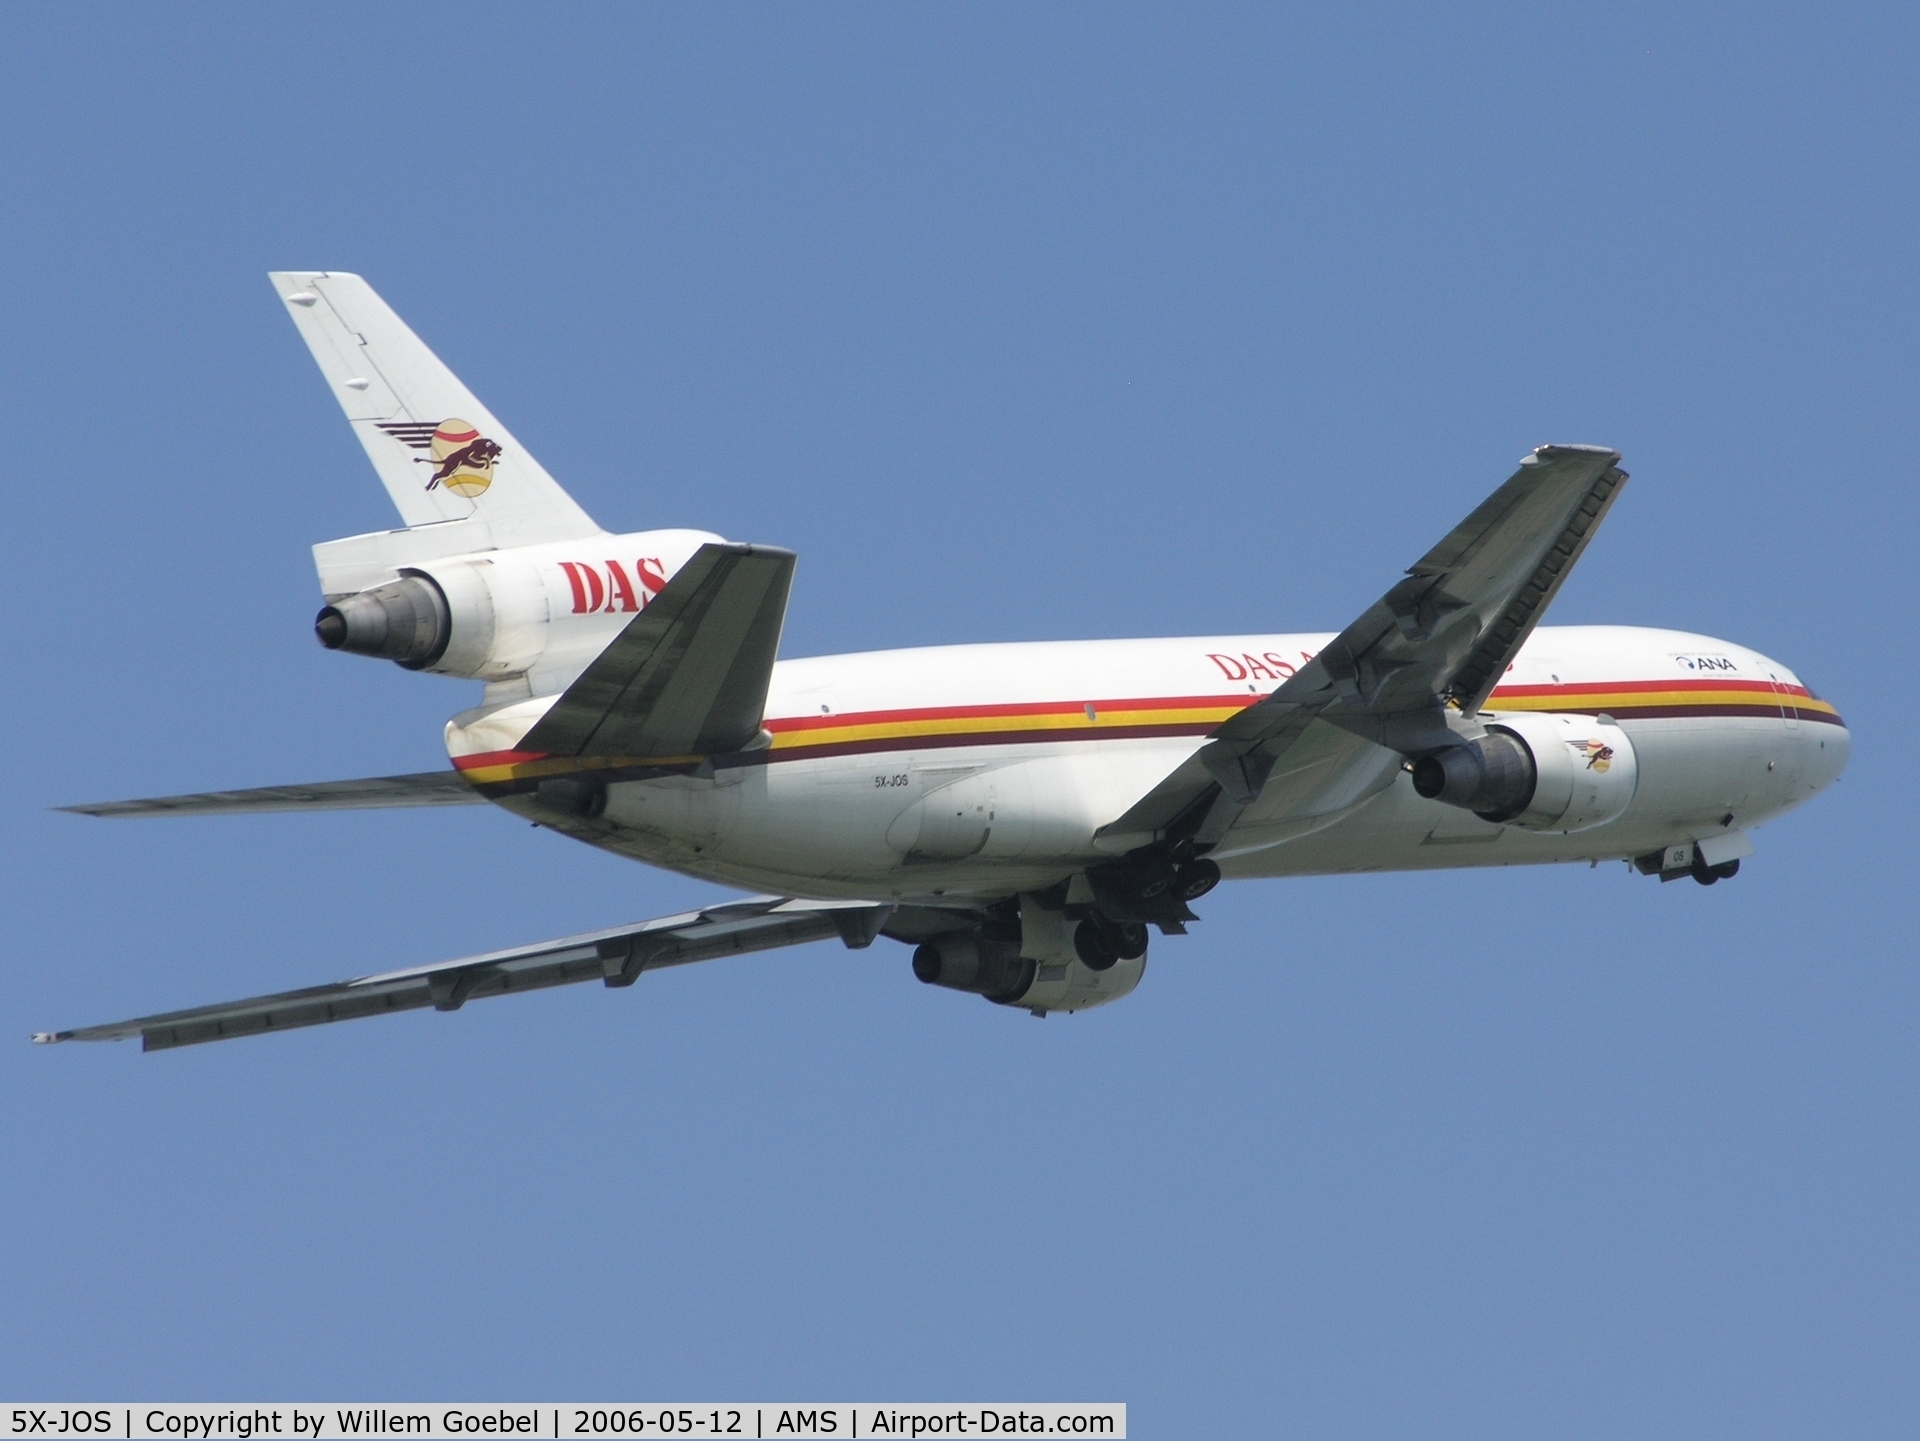 5X-JOS, 1978 McDonnell Douglas DC-10-30F C/N 46976, Take off of Amsterdam Airport from the 